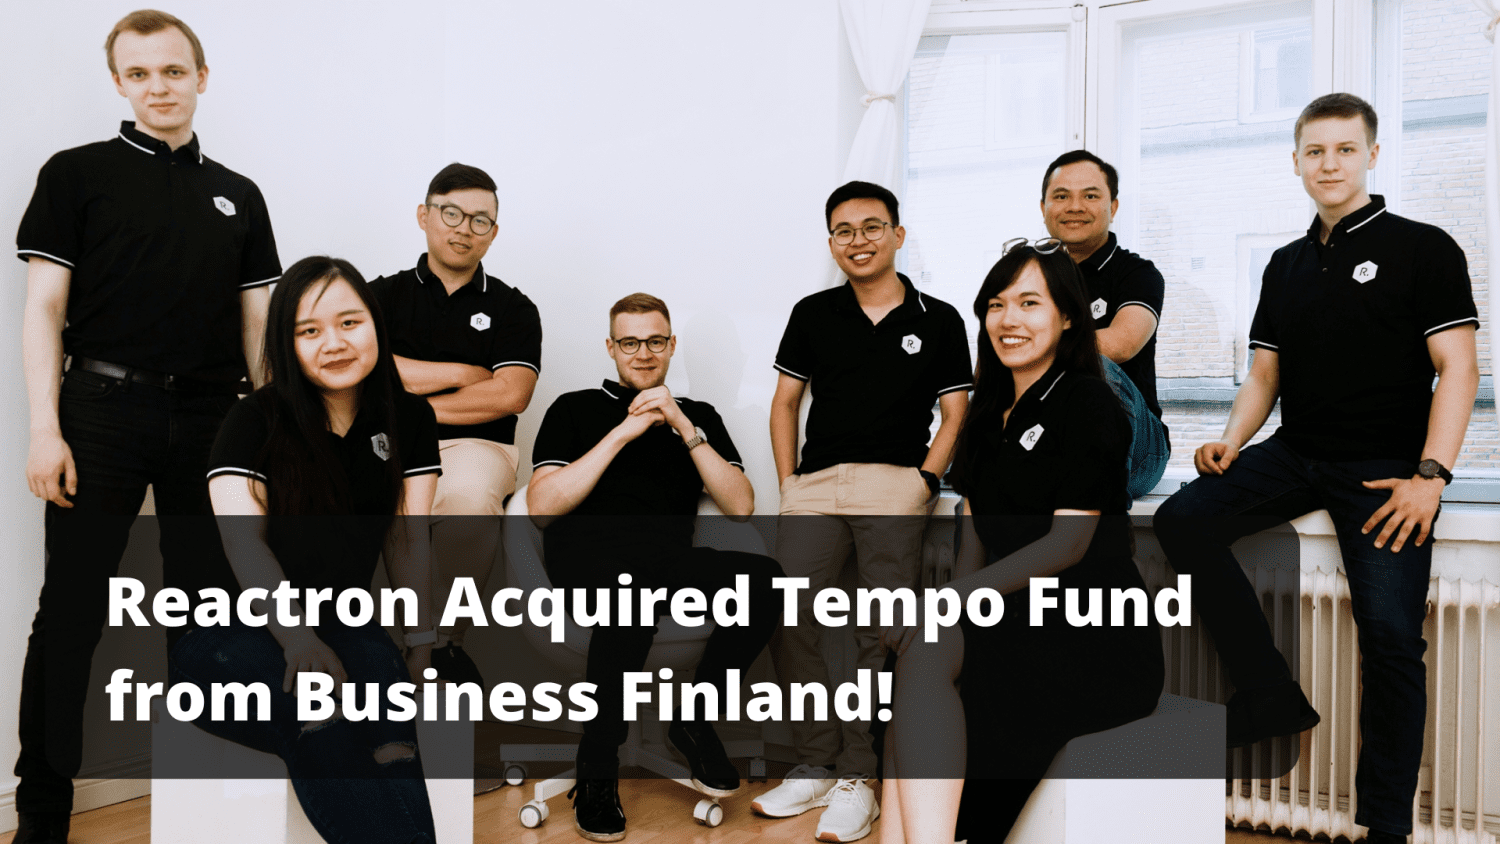 Reactron Technologies Oy received Tempo Fund from Business Finland